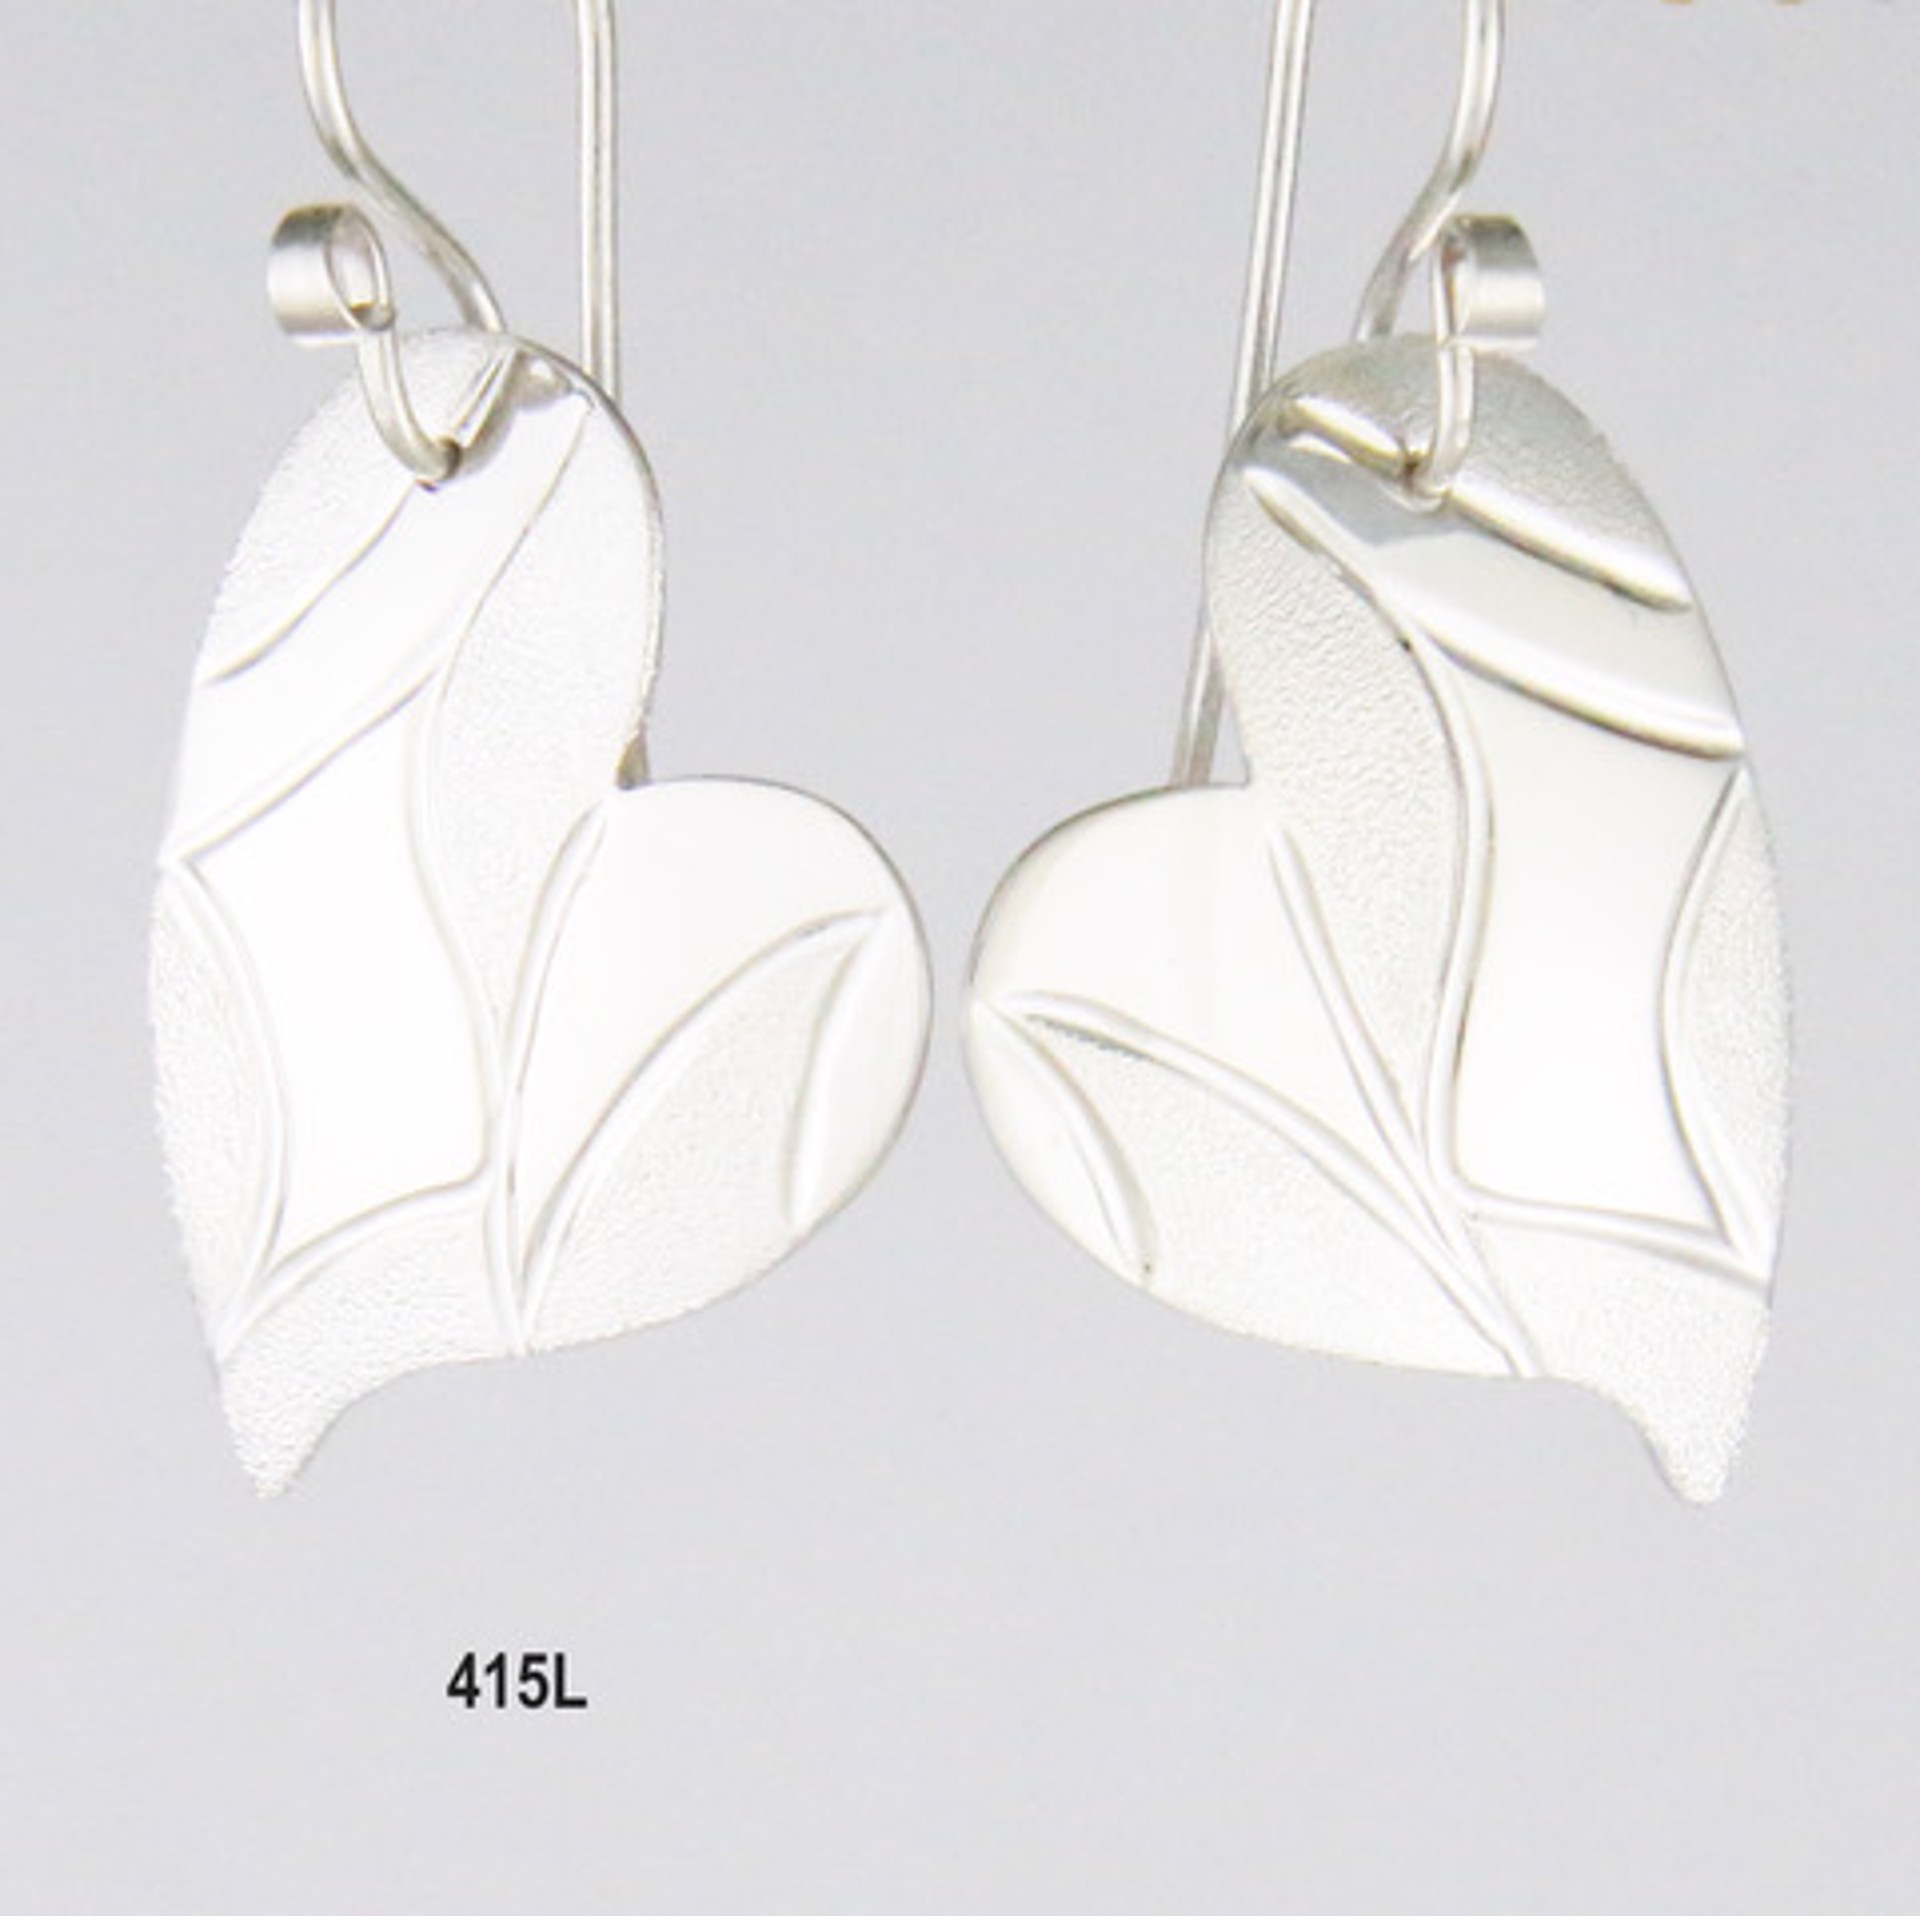 Earrings - Hand Engraved Sterling Silver - 415L by Ken and Barbara Newman